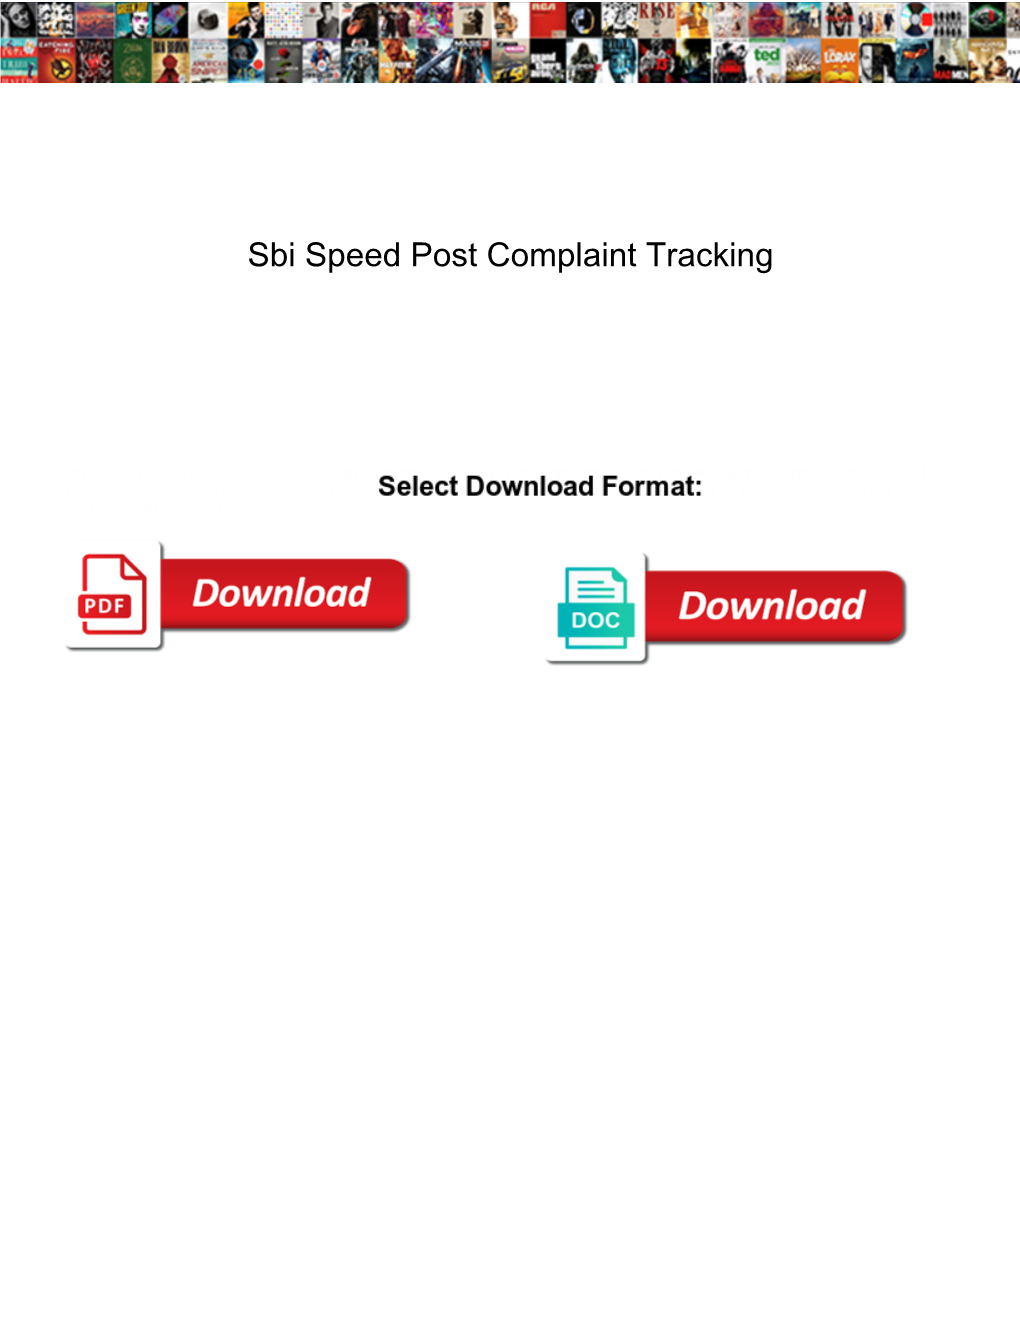 Sbi Speed Post Complaint Tracking